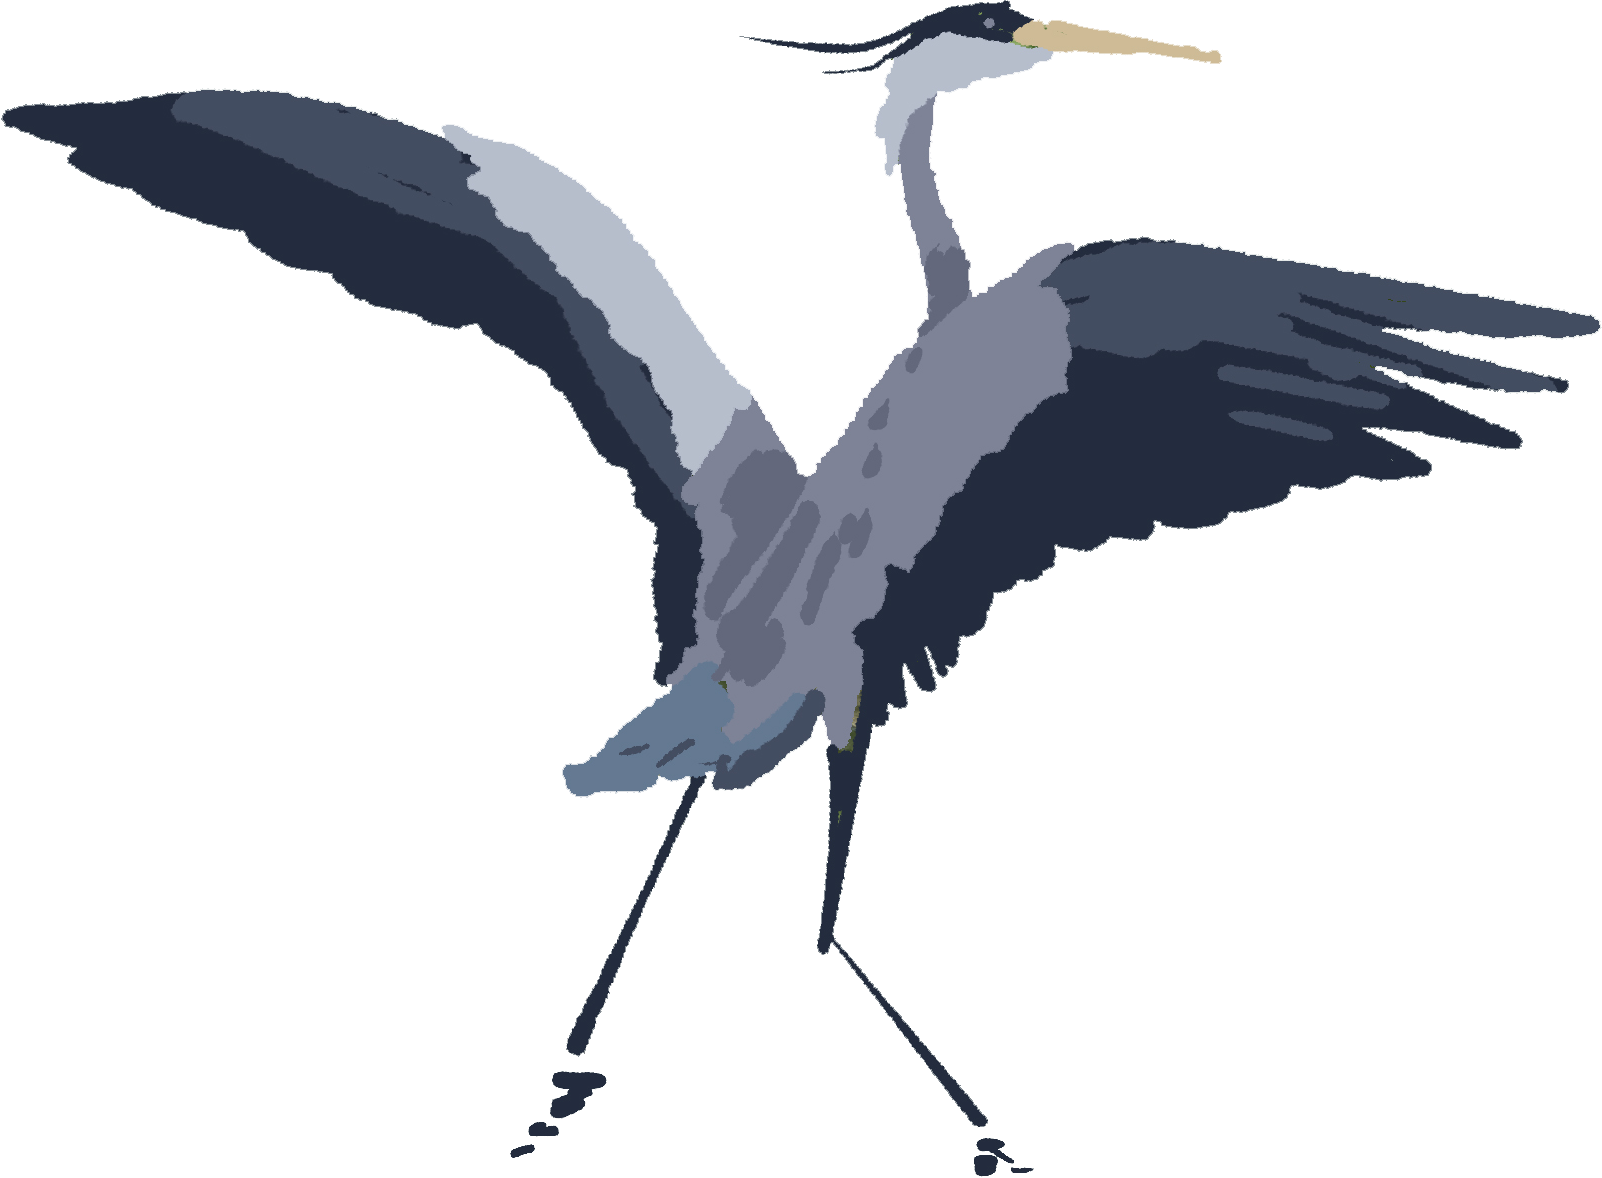 Heron with wings splayed